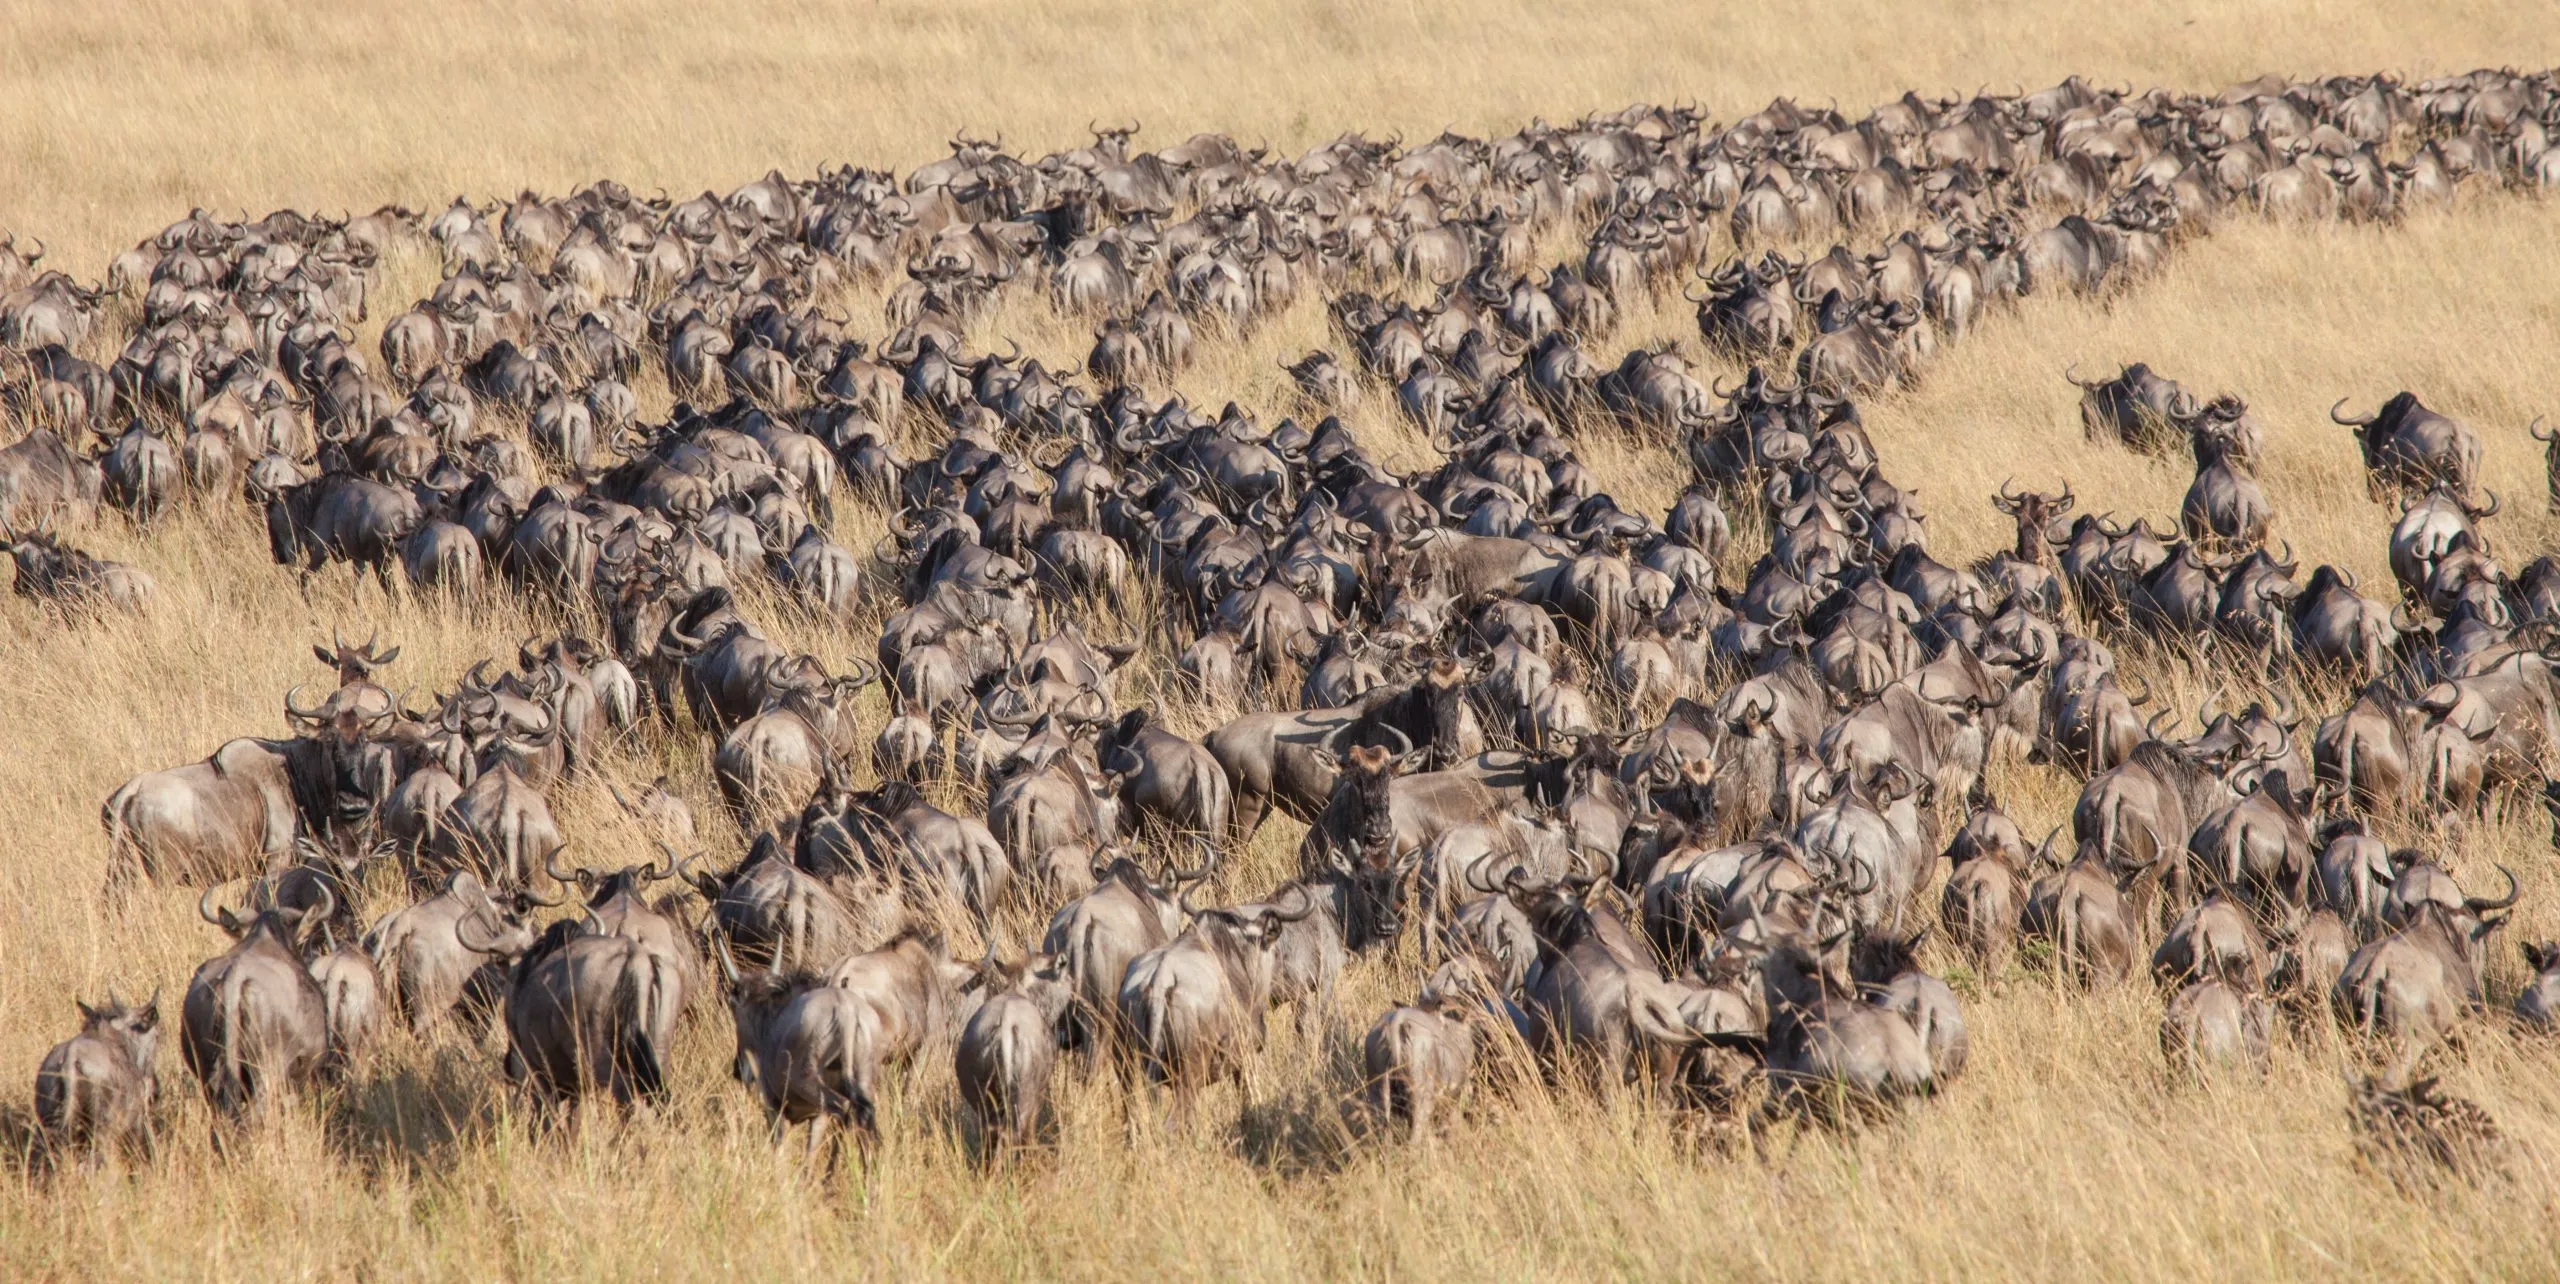 Long lines and masses of wildebeest in the Great Migration of the Serengeti and Masai Mara in East Africa